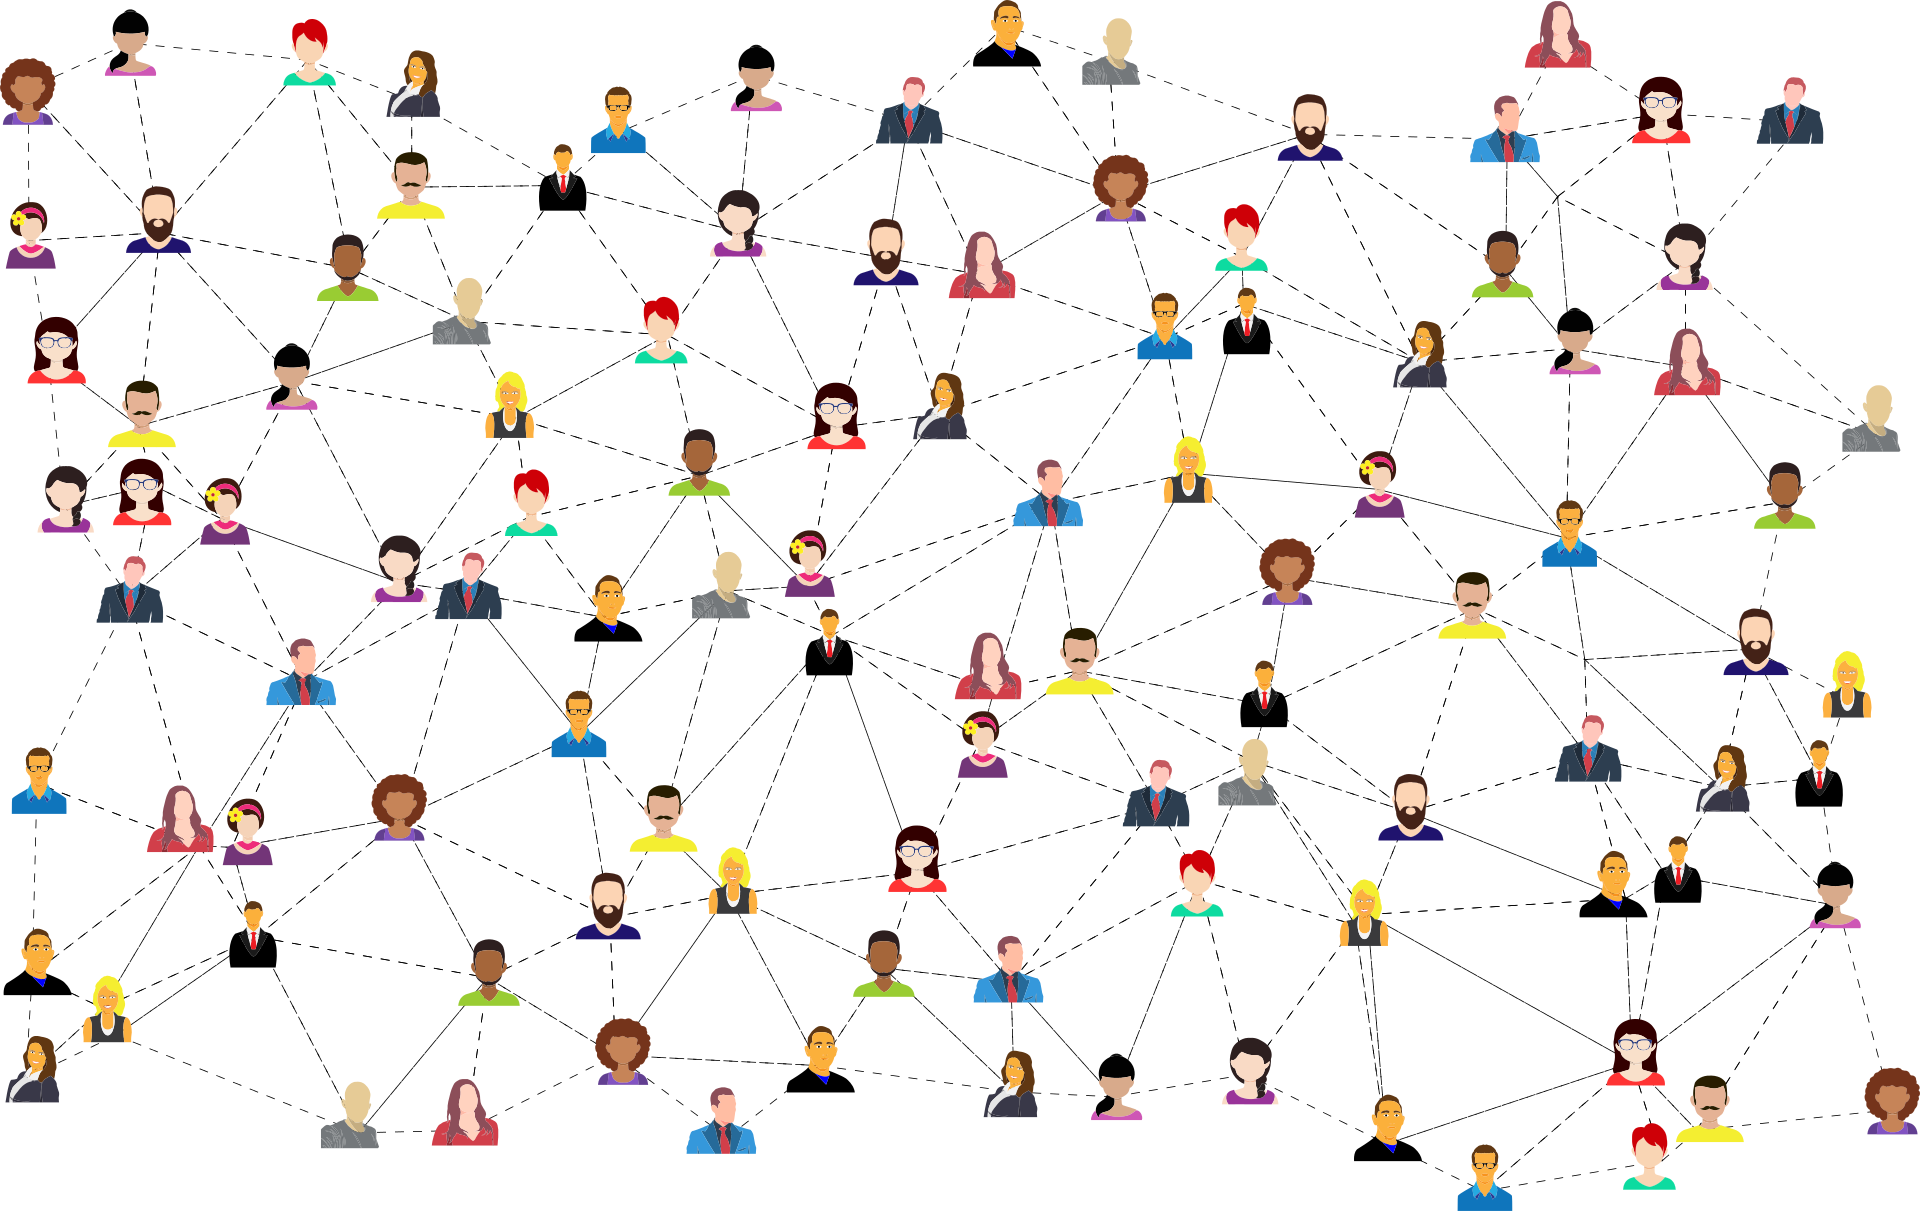 A diverse range of people connected by dotted and full lines to represent a network